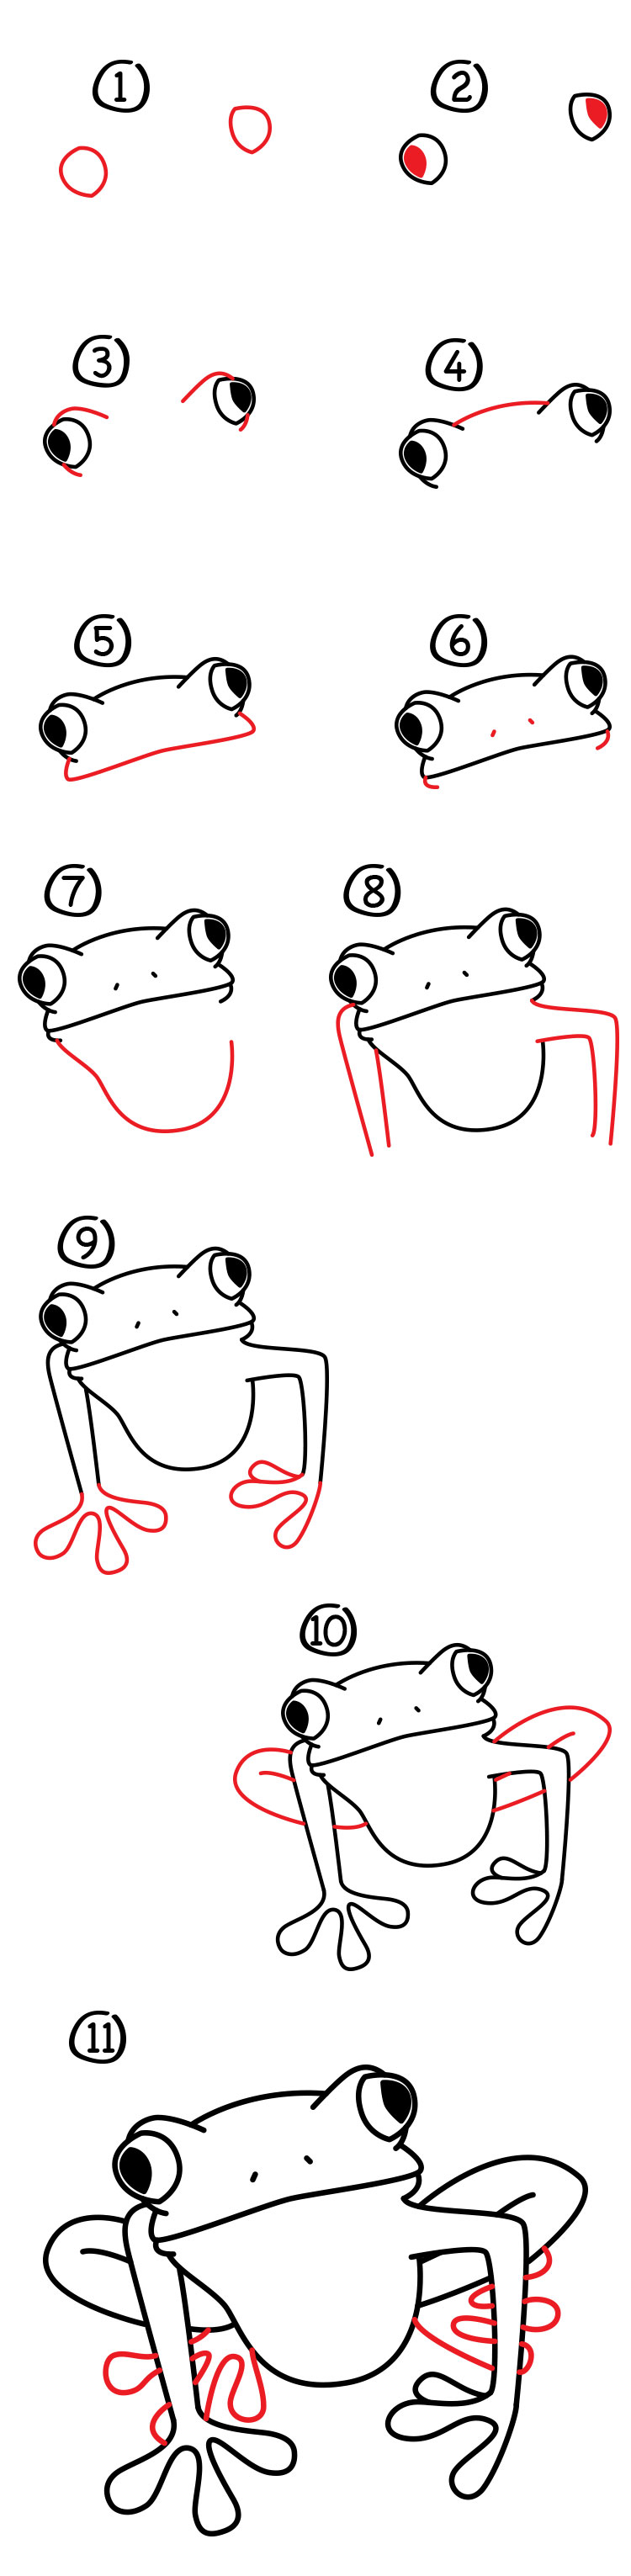 How To Draw A Tree Frog Art For Kids Hub